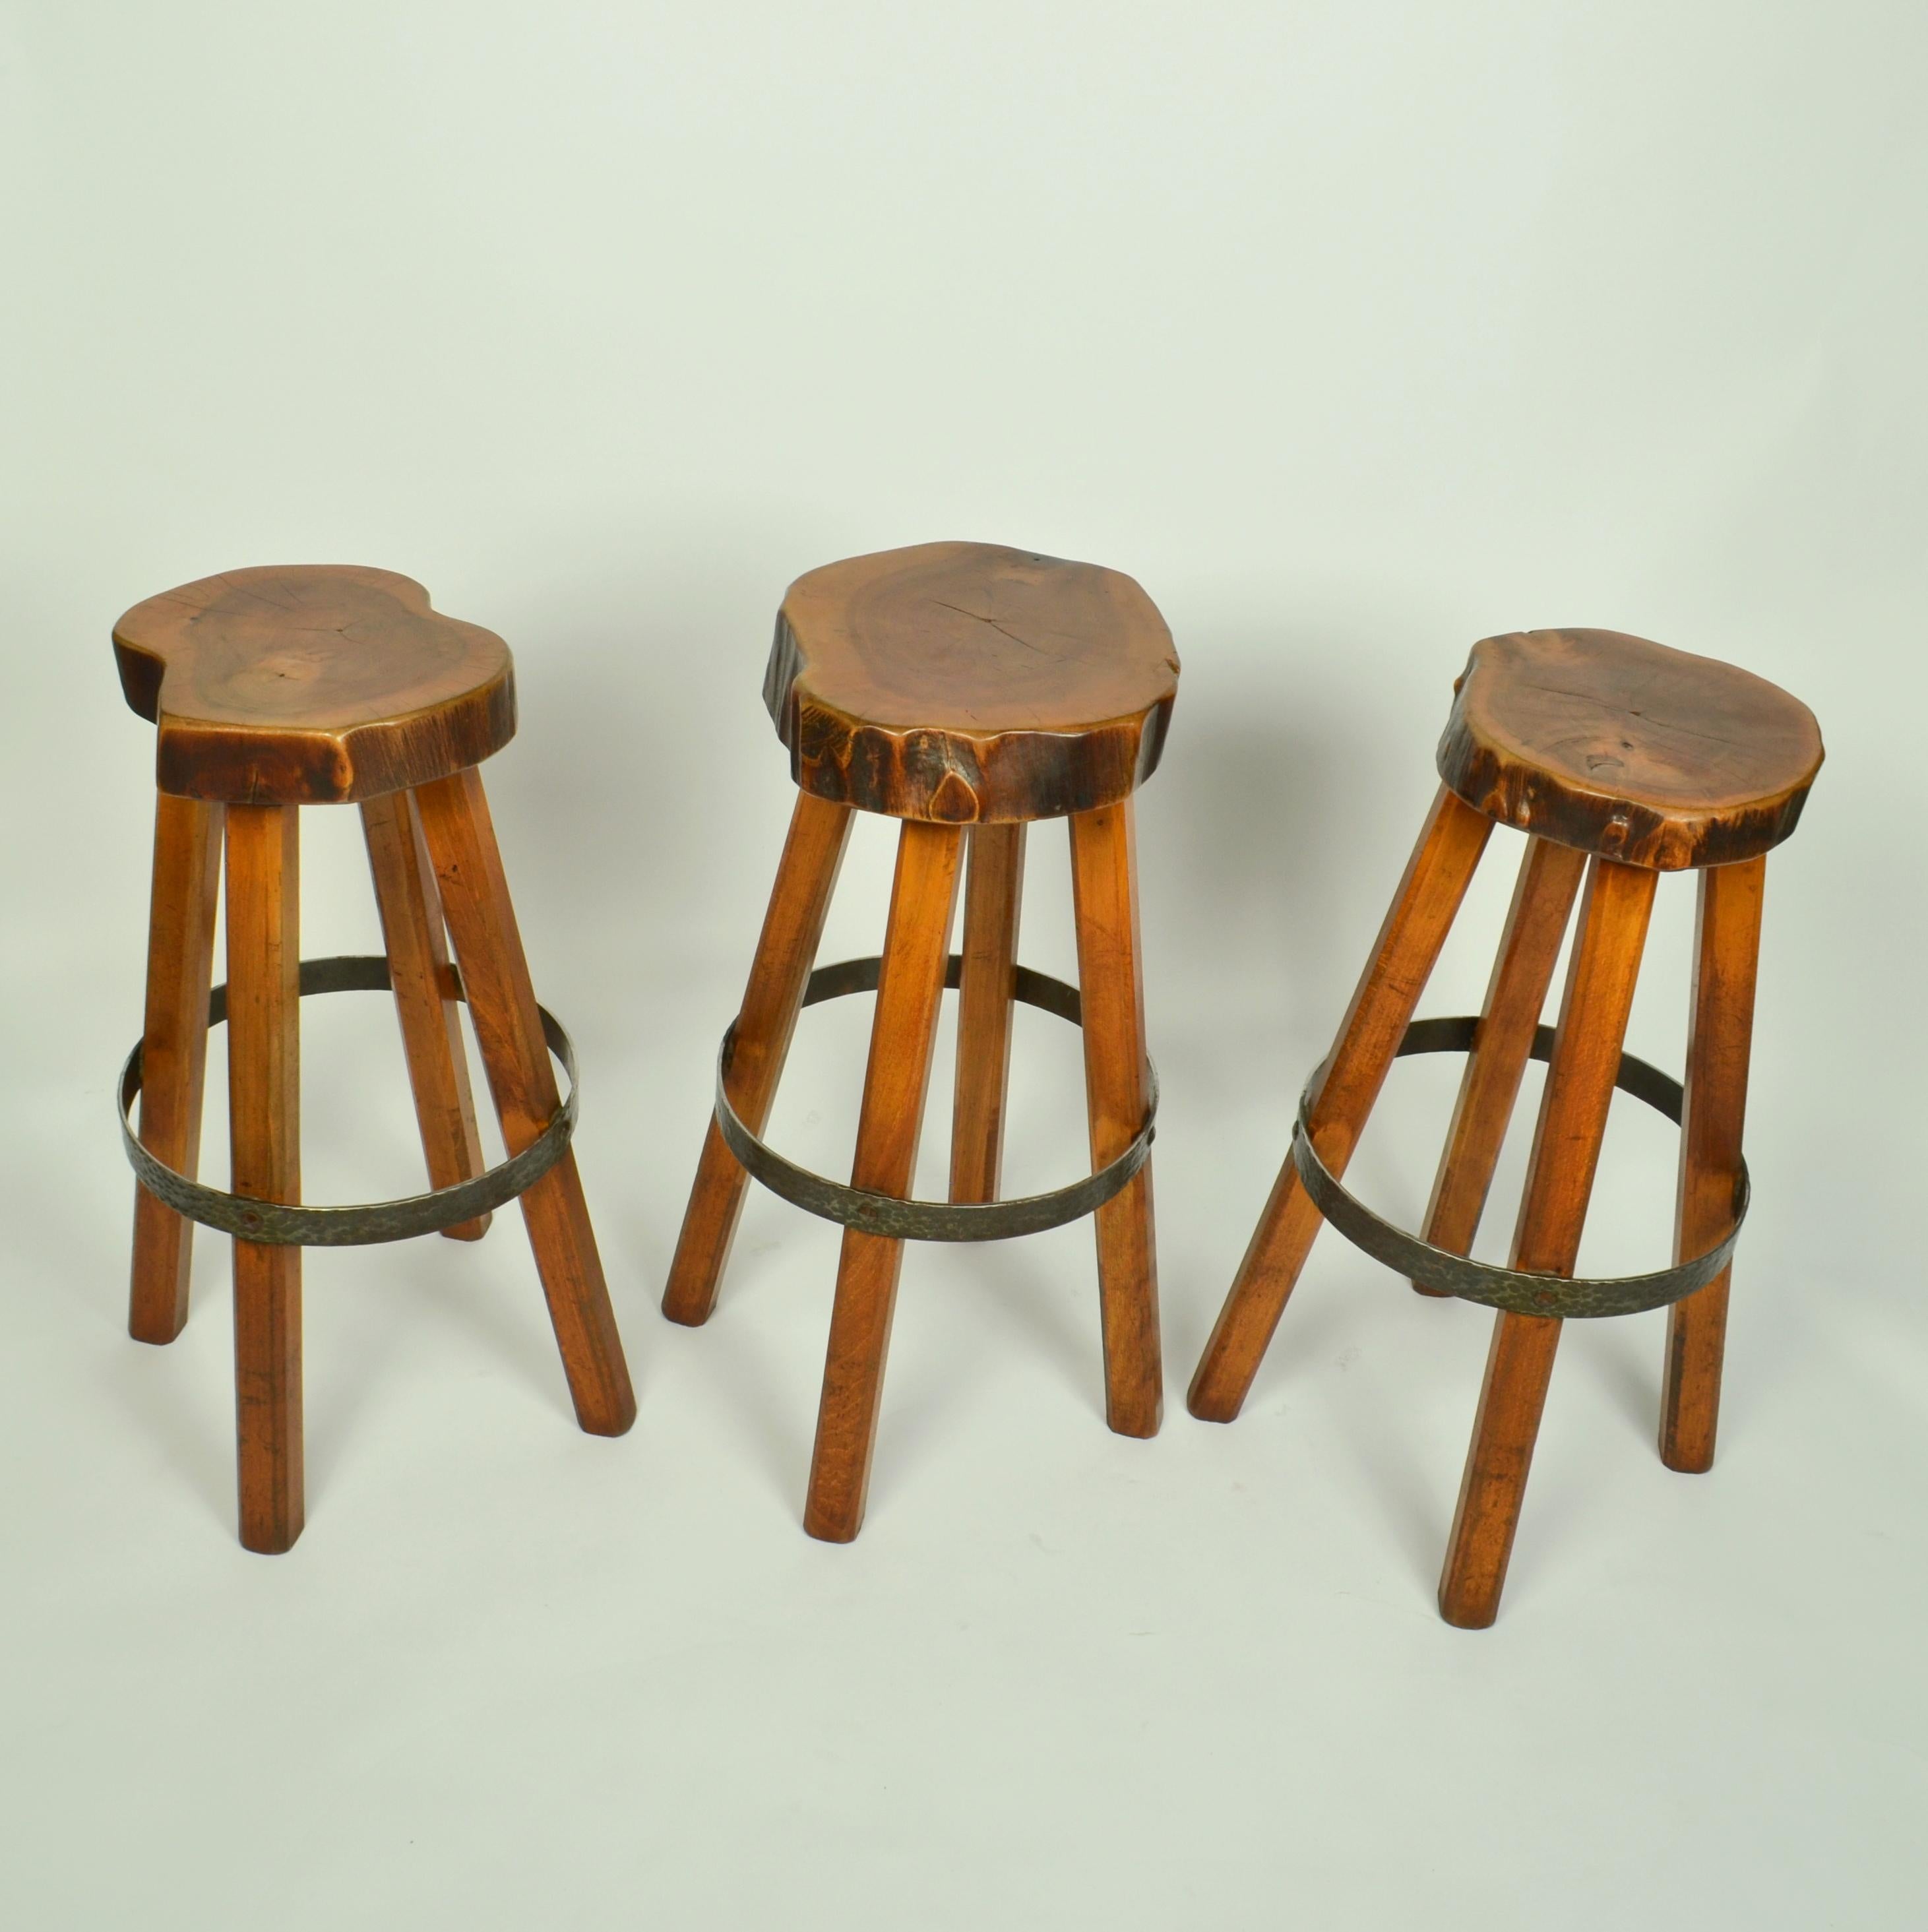 handcrafted bar stools in Burr Elm wood 1970s. These unique stools have been handmade individually, therefore each stool is unique with a freeform shape seat using the natural contours of the wood. The voluptuous four legged high stools have a